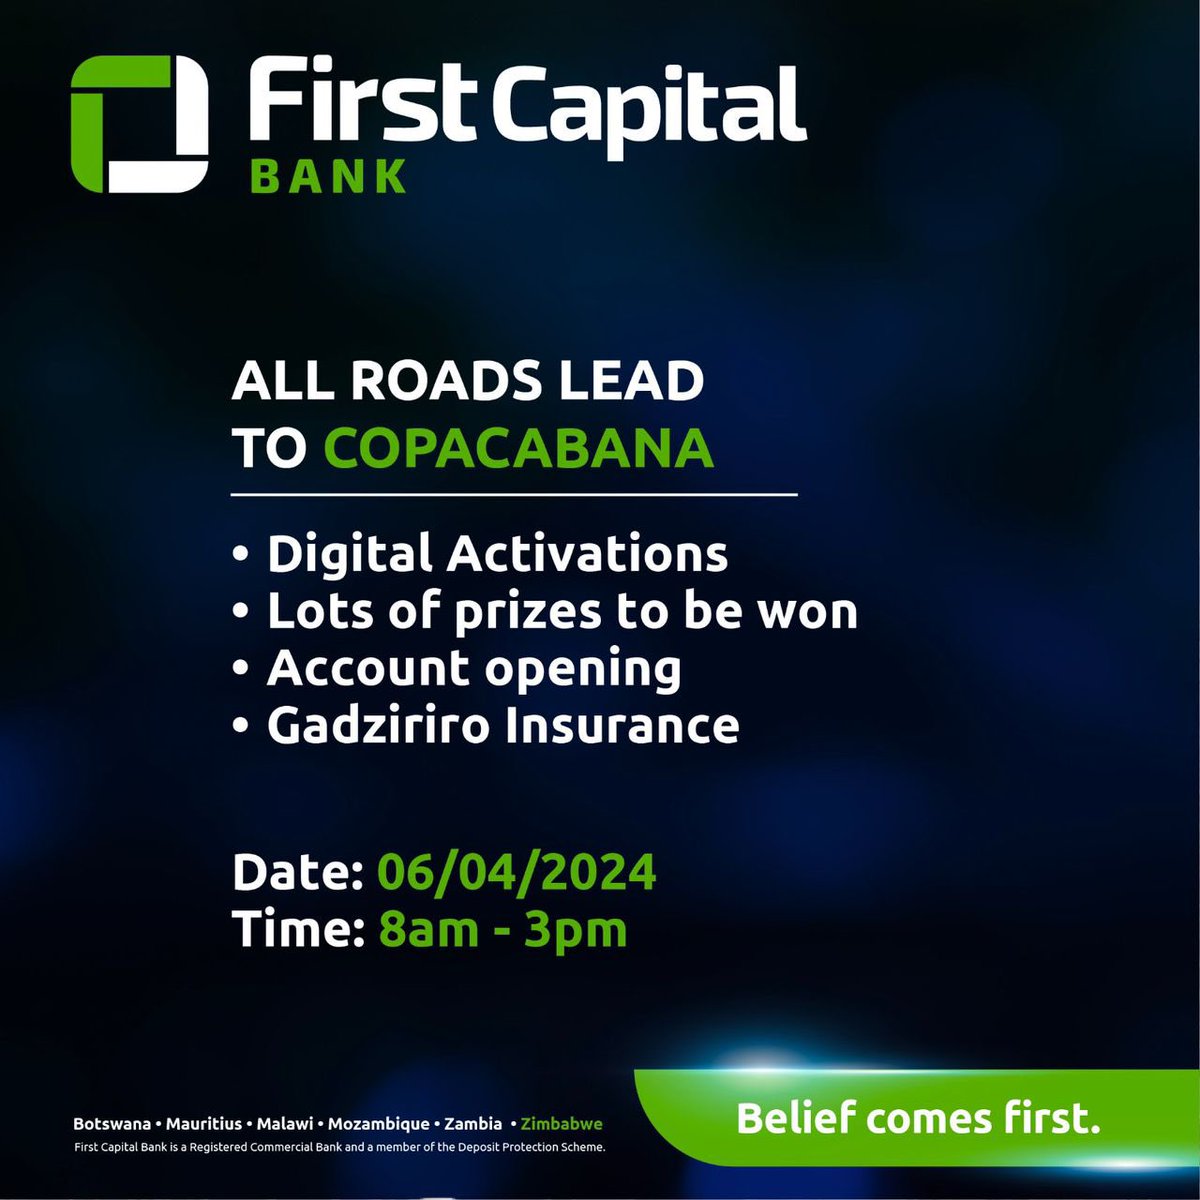 We are at Copacabana tomorrow. Join us and stand a chance to win prices. • Account opening • Gadziriro Insurance • Digital Activations #BeliefComesFirst